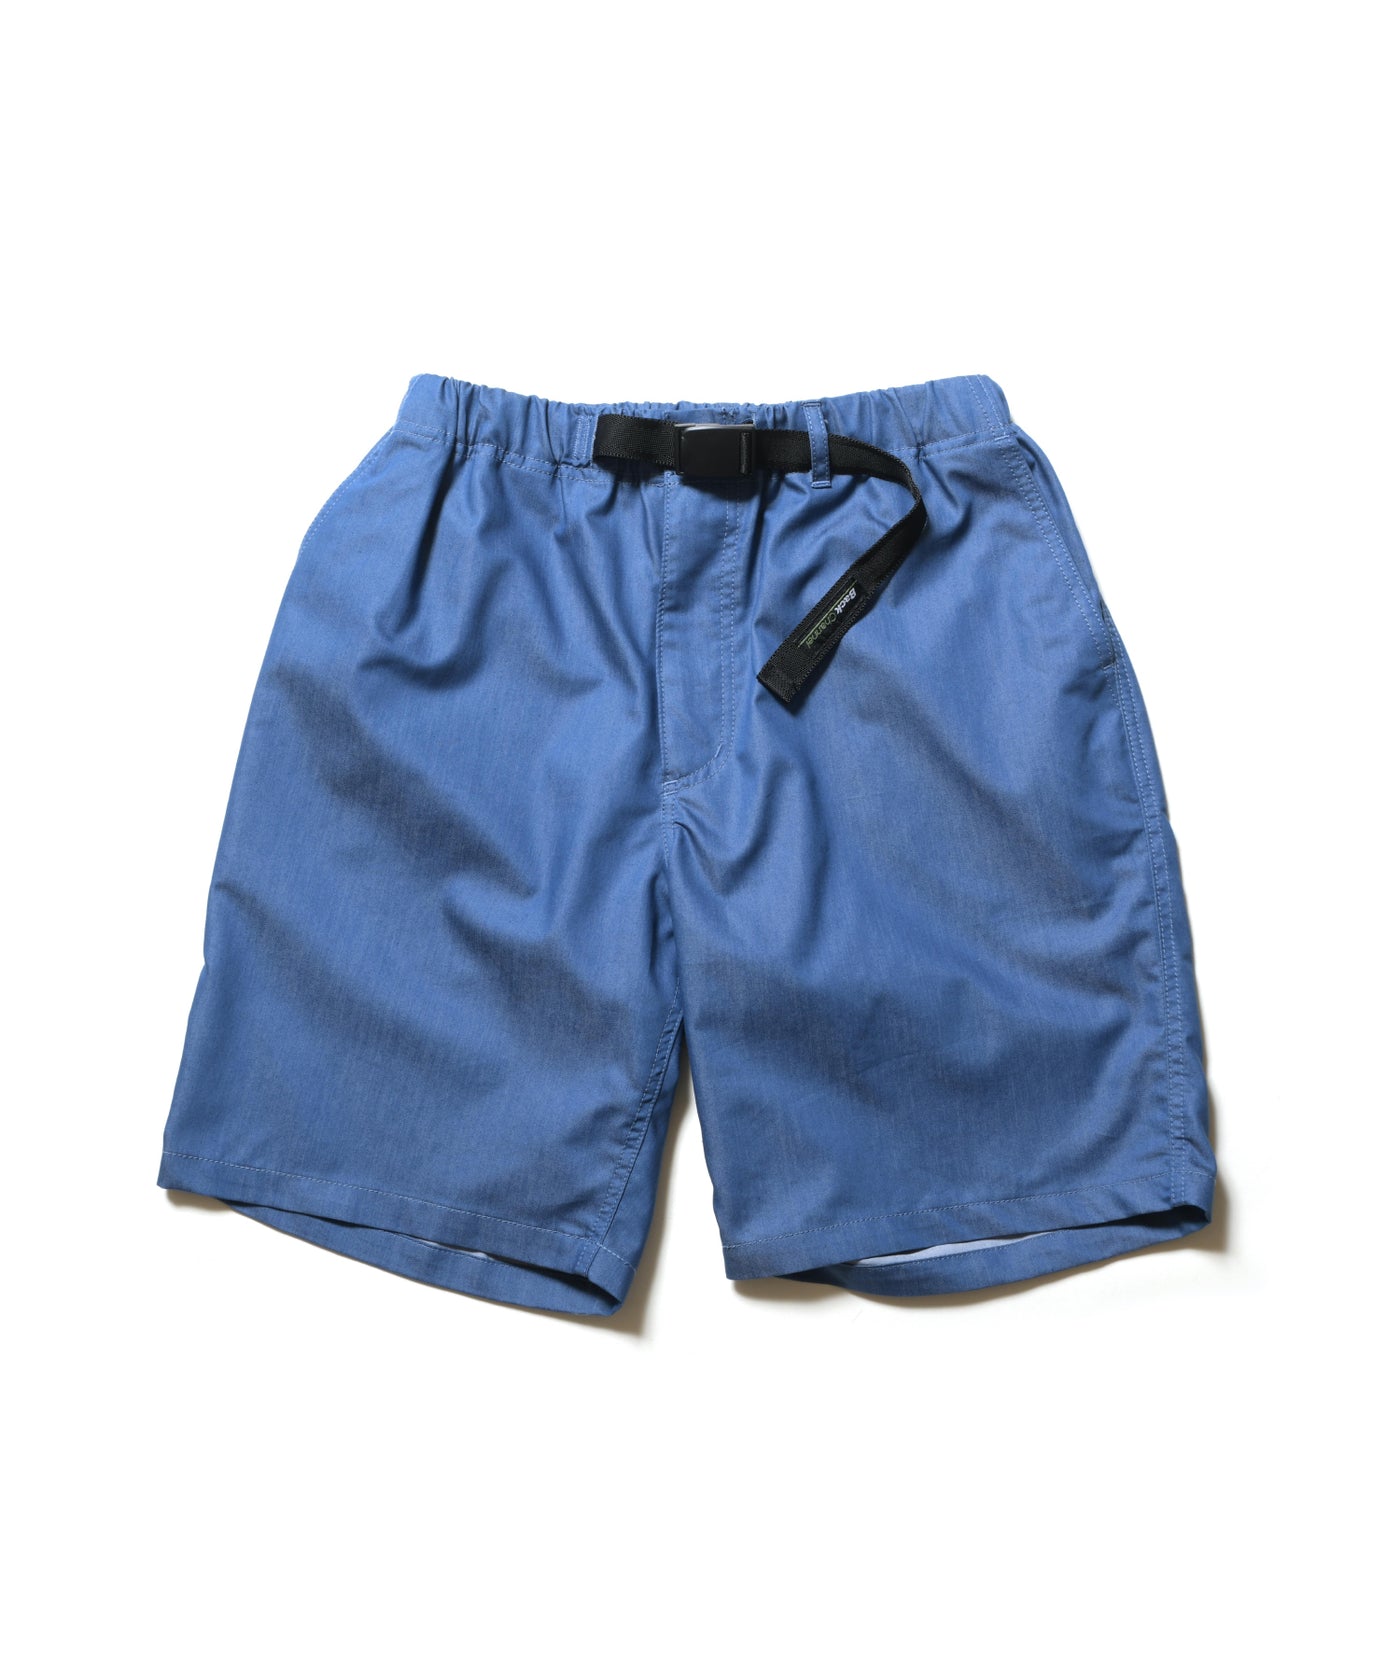 DRY COOL SHORTS